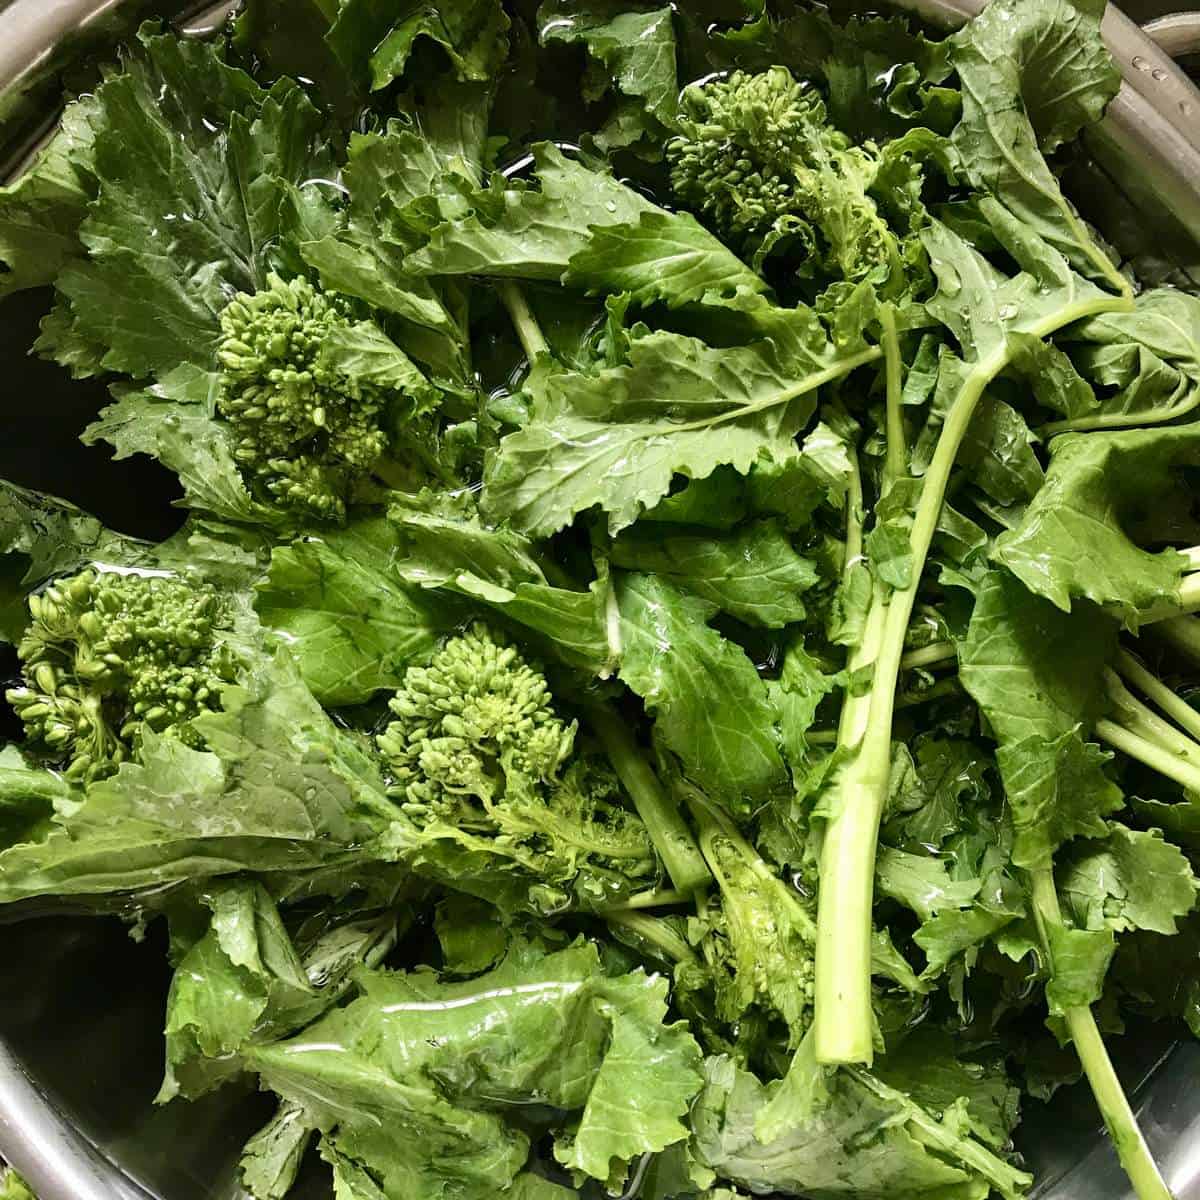 Broccoli rabe submerged in a large bowl of water.